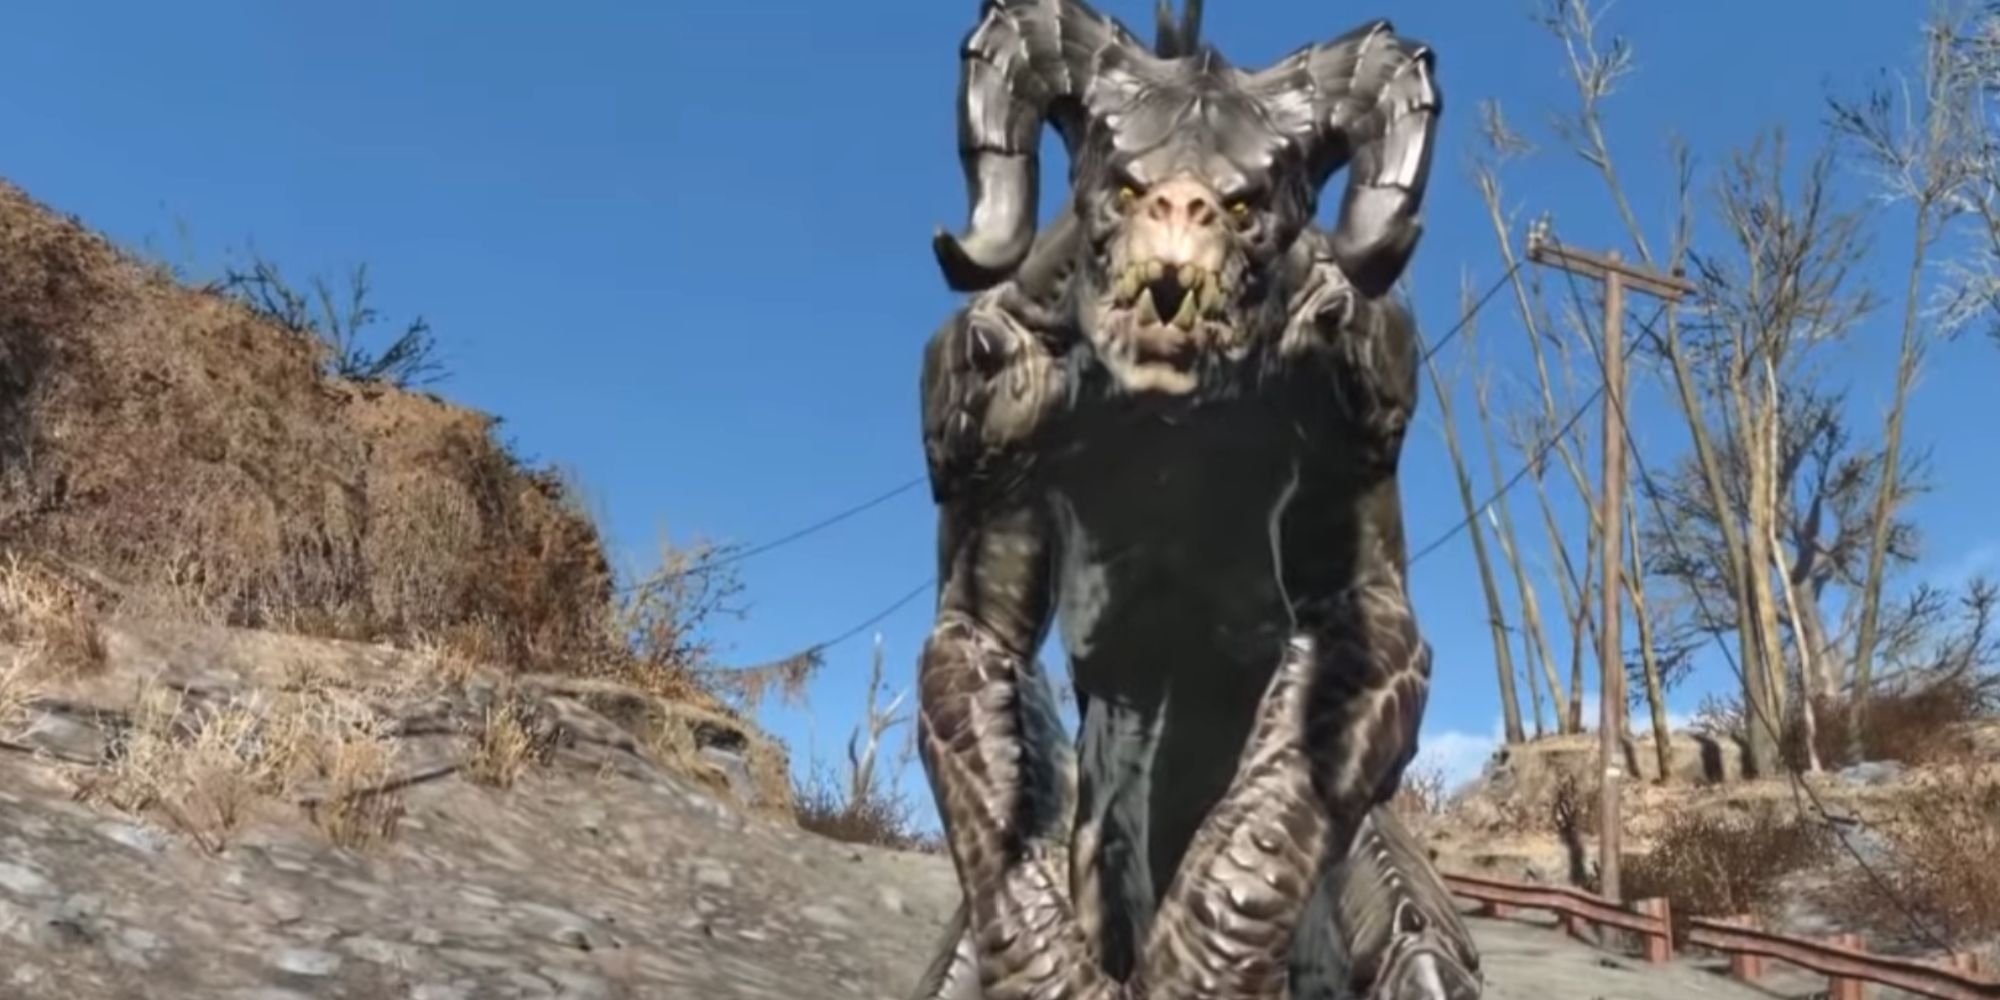 Fallout 4 Deathclaw Standing Up And Looking At The Player